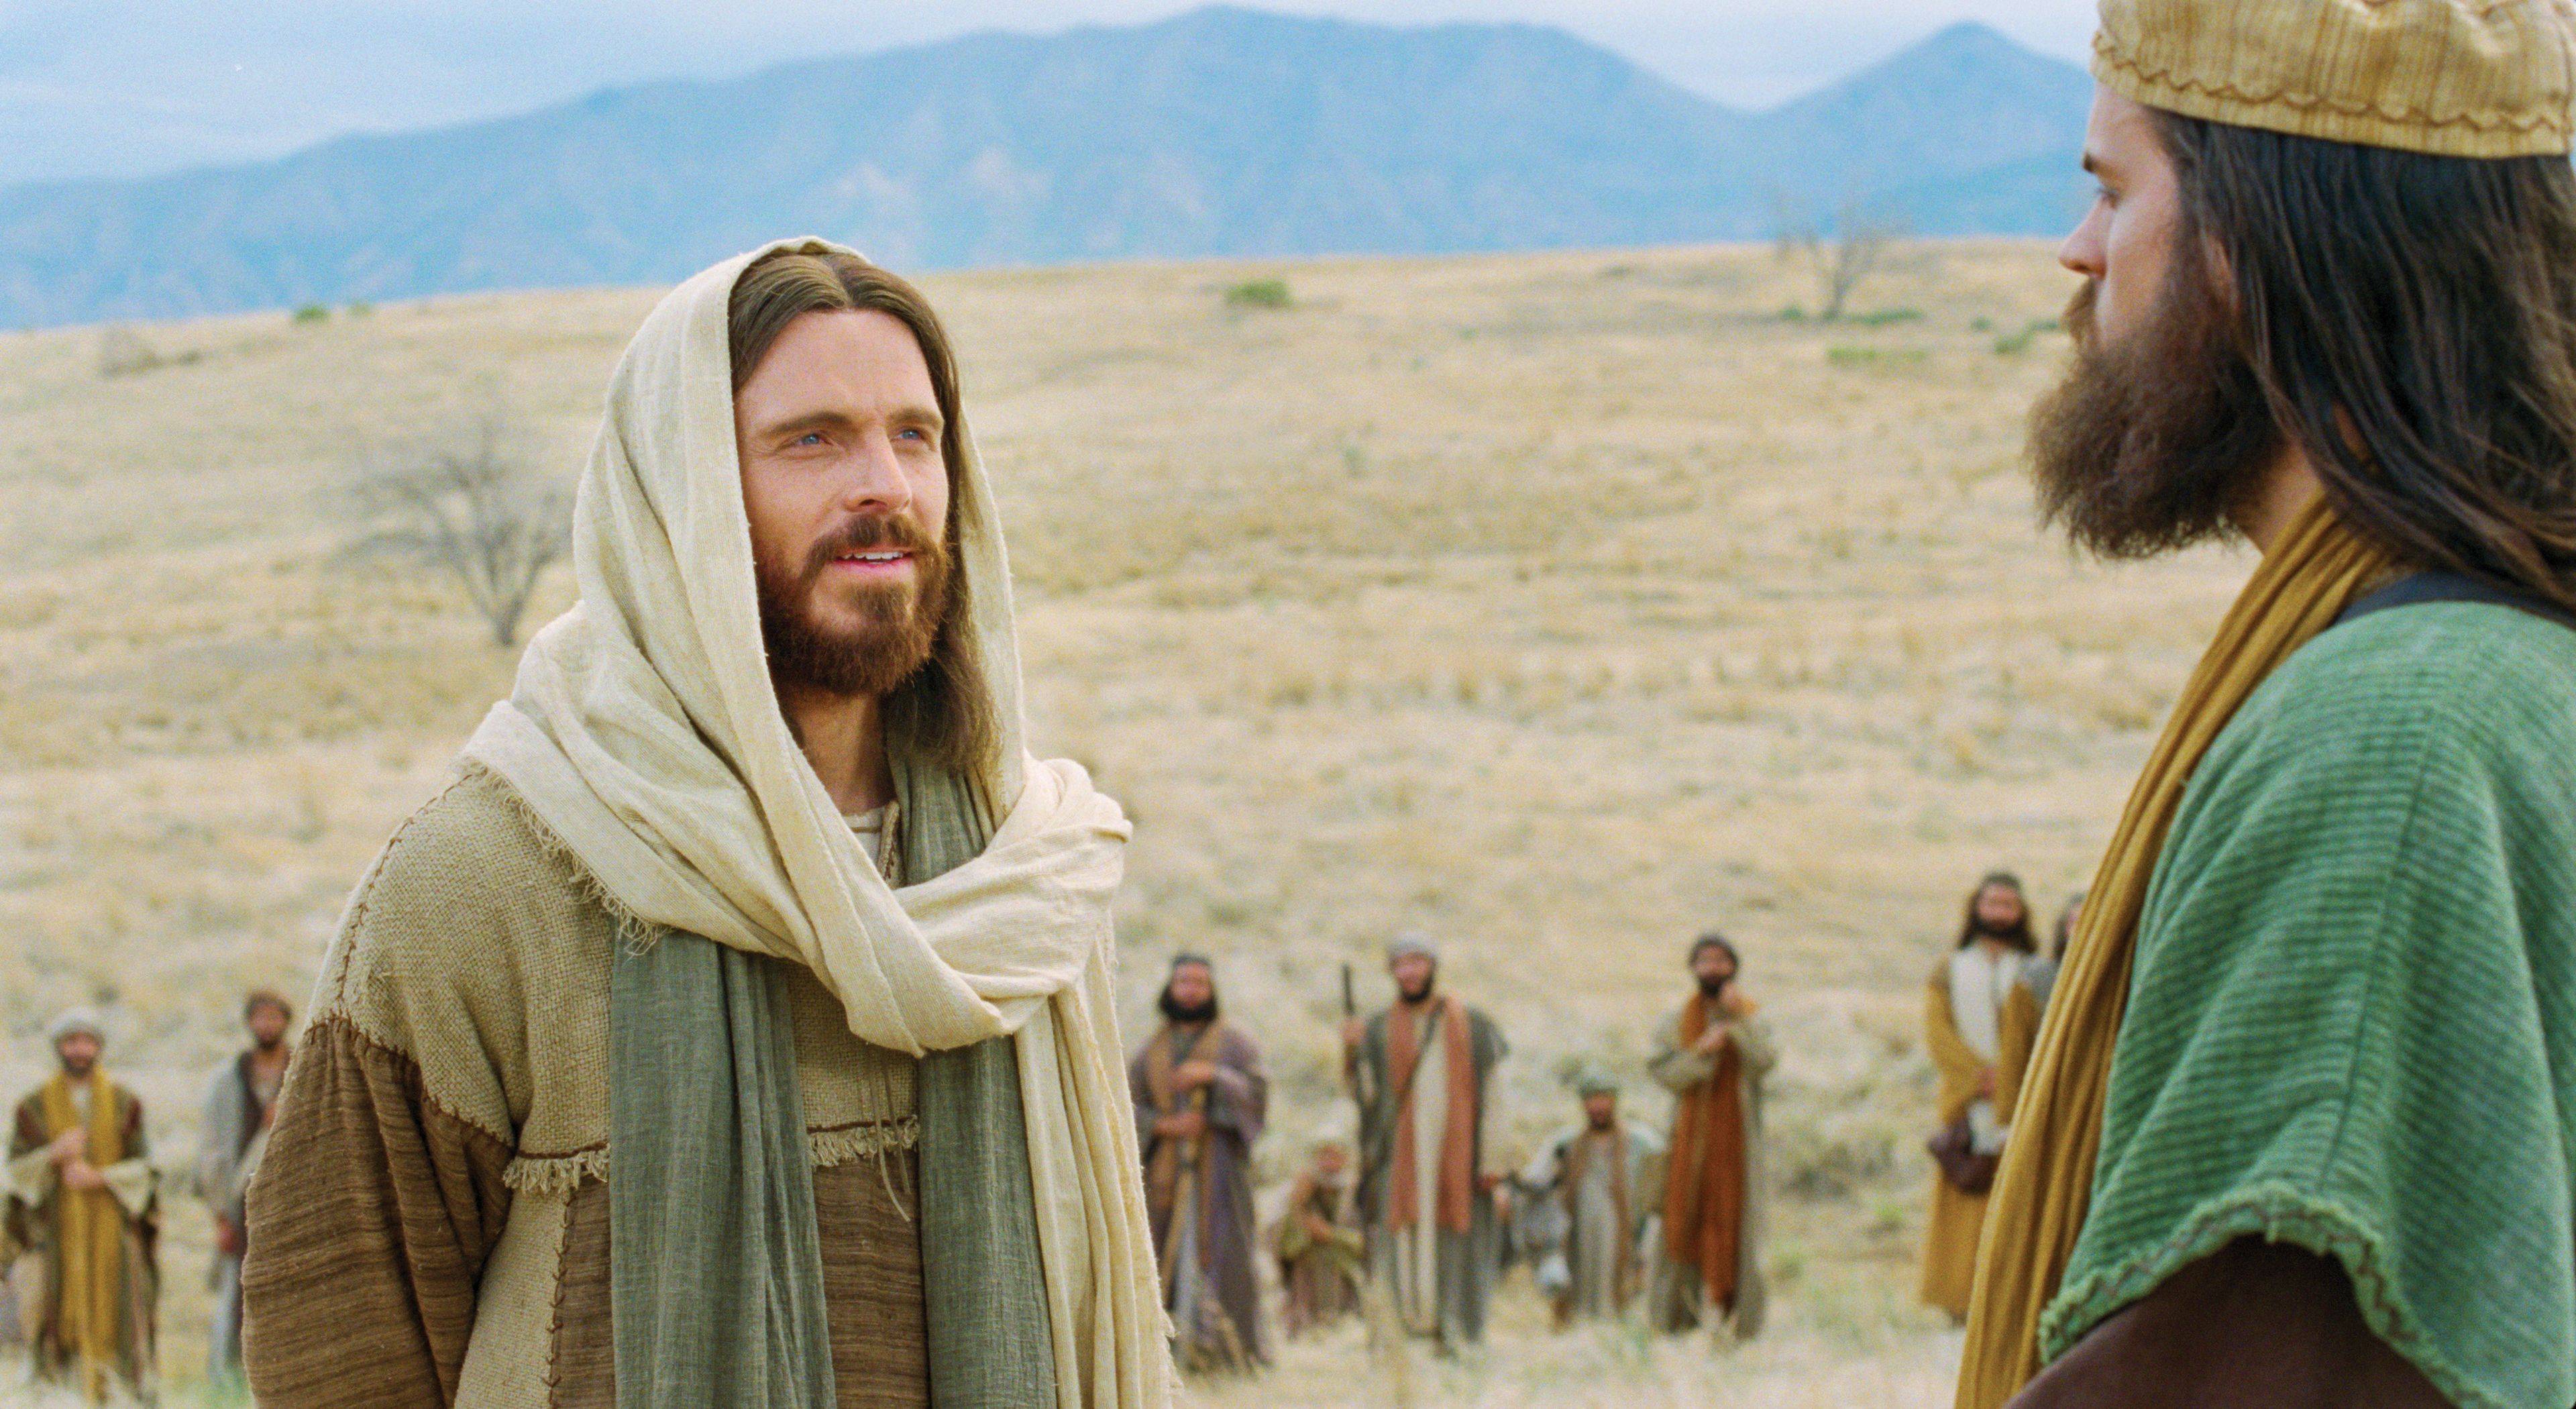 Jesus tells the parable of the good Samaritan and a man who was robbed and left half dead on the road to Jericho.